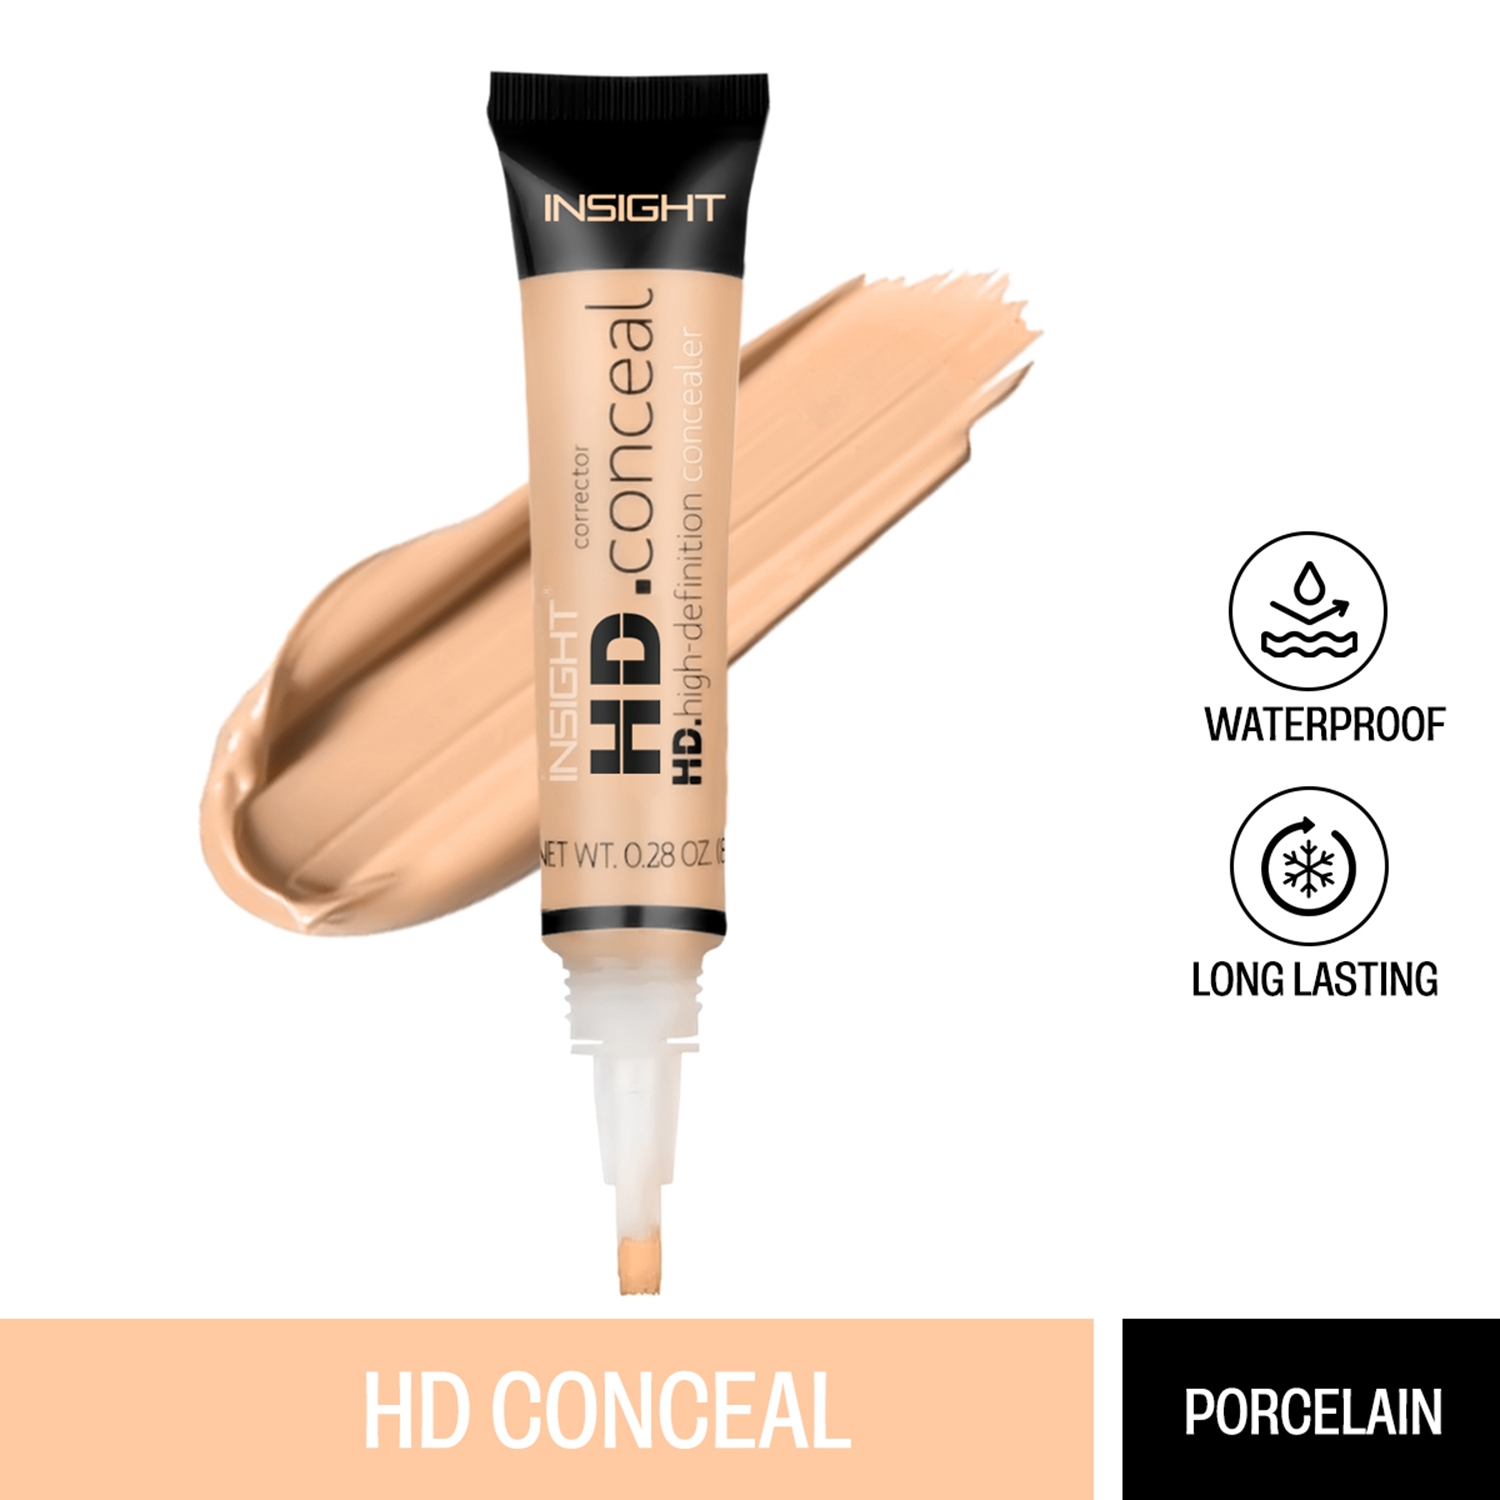 Insight Cosmetics | Insight Cosmetics HD Conceal - Porcelain (8g)